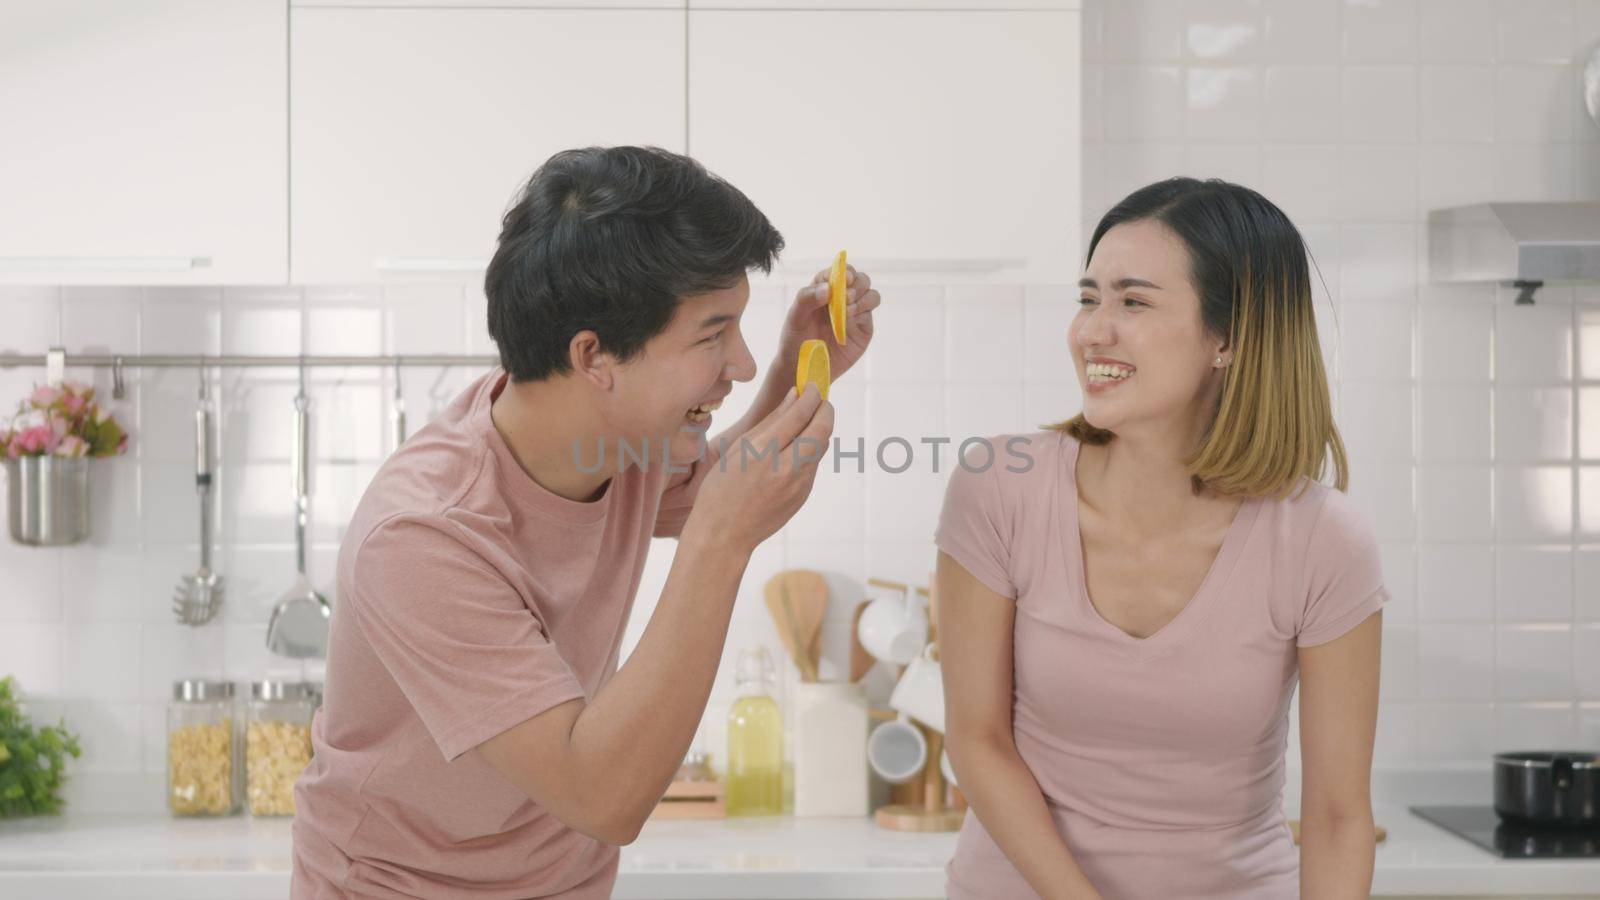 Happy Asian beautiful young family couple husband and wife enjoying smile and laugh holds a cut orange in front of the guy's eyes spending time together in kitchen at home.